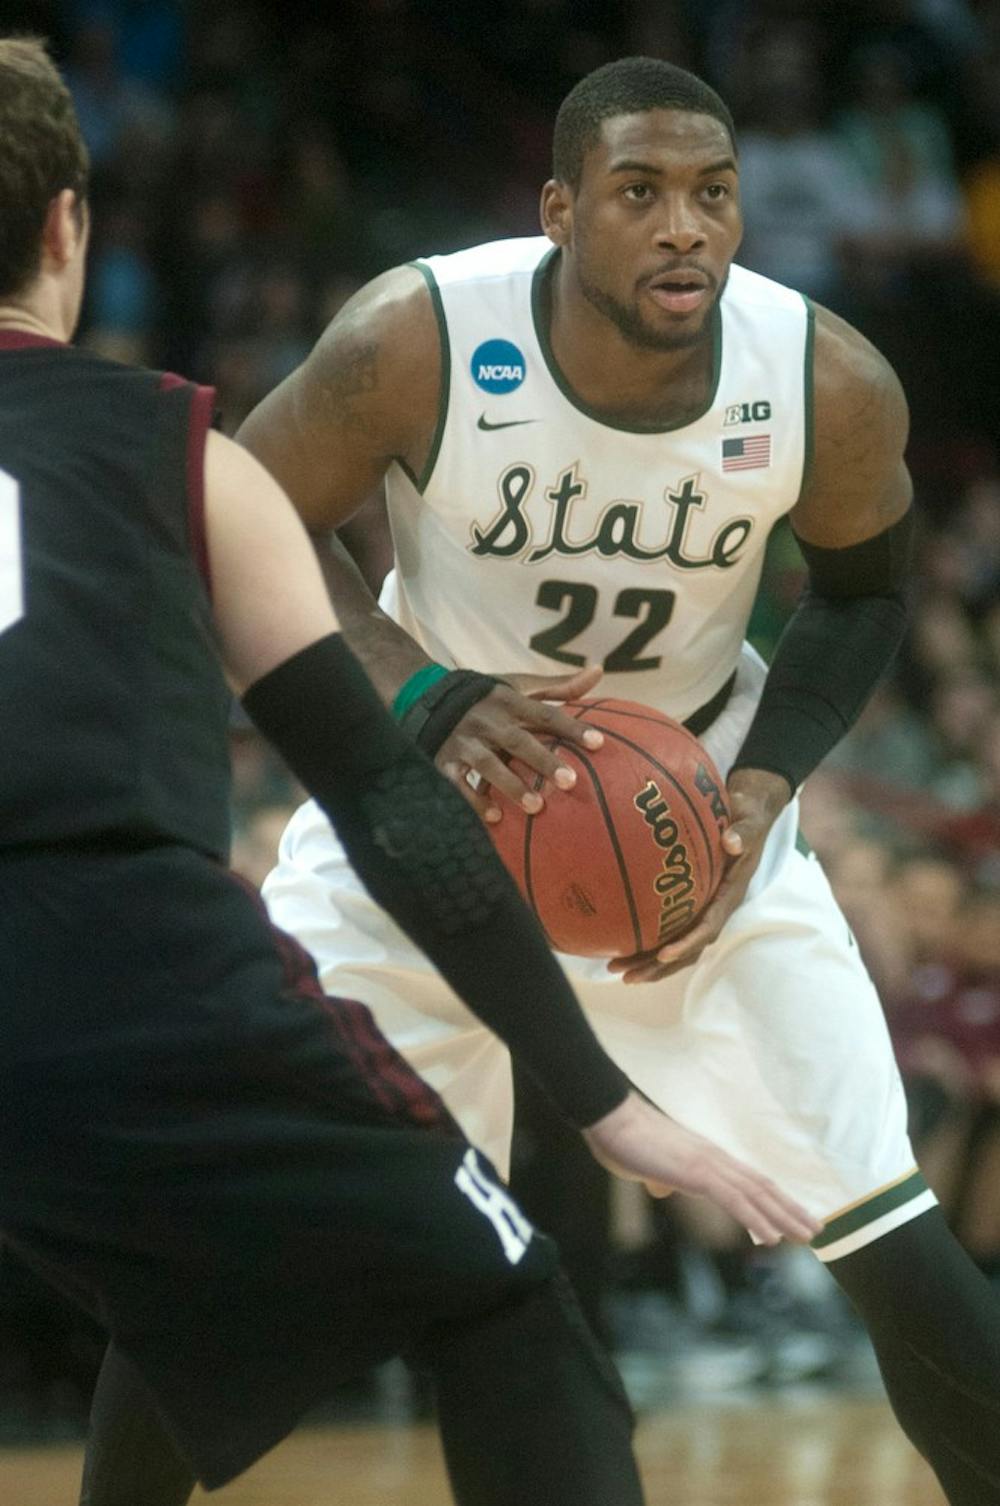 <p>Junior guard/forward Branden Dawson passes the ball while Harvard guard Laurent Rivard guards on March 22, 2014, at Spokane Veterans Memorial Arena in Spokane, Wash. during their game against Harvard in the NCAA Tournament. Dawson made 26 points during the game. Betsy Agosta/The State News</p>